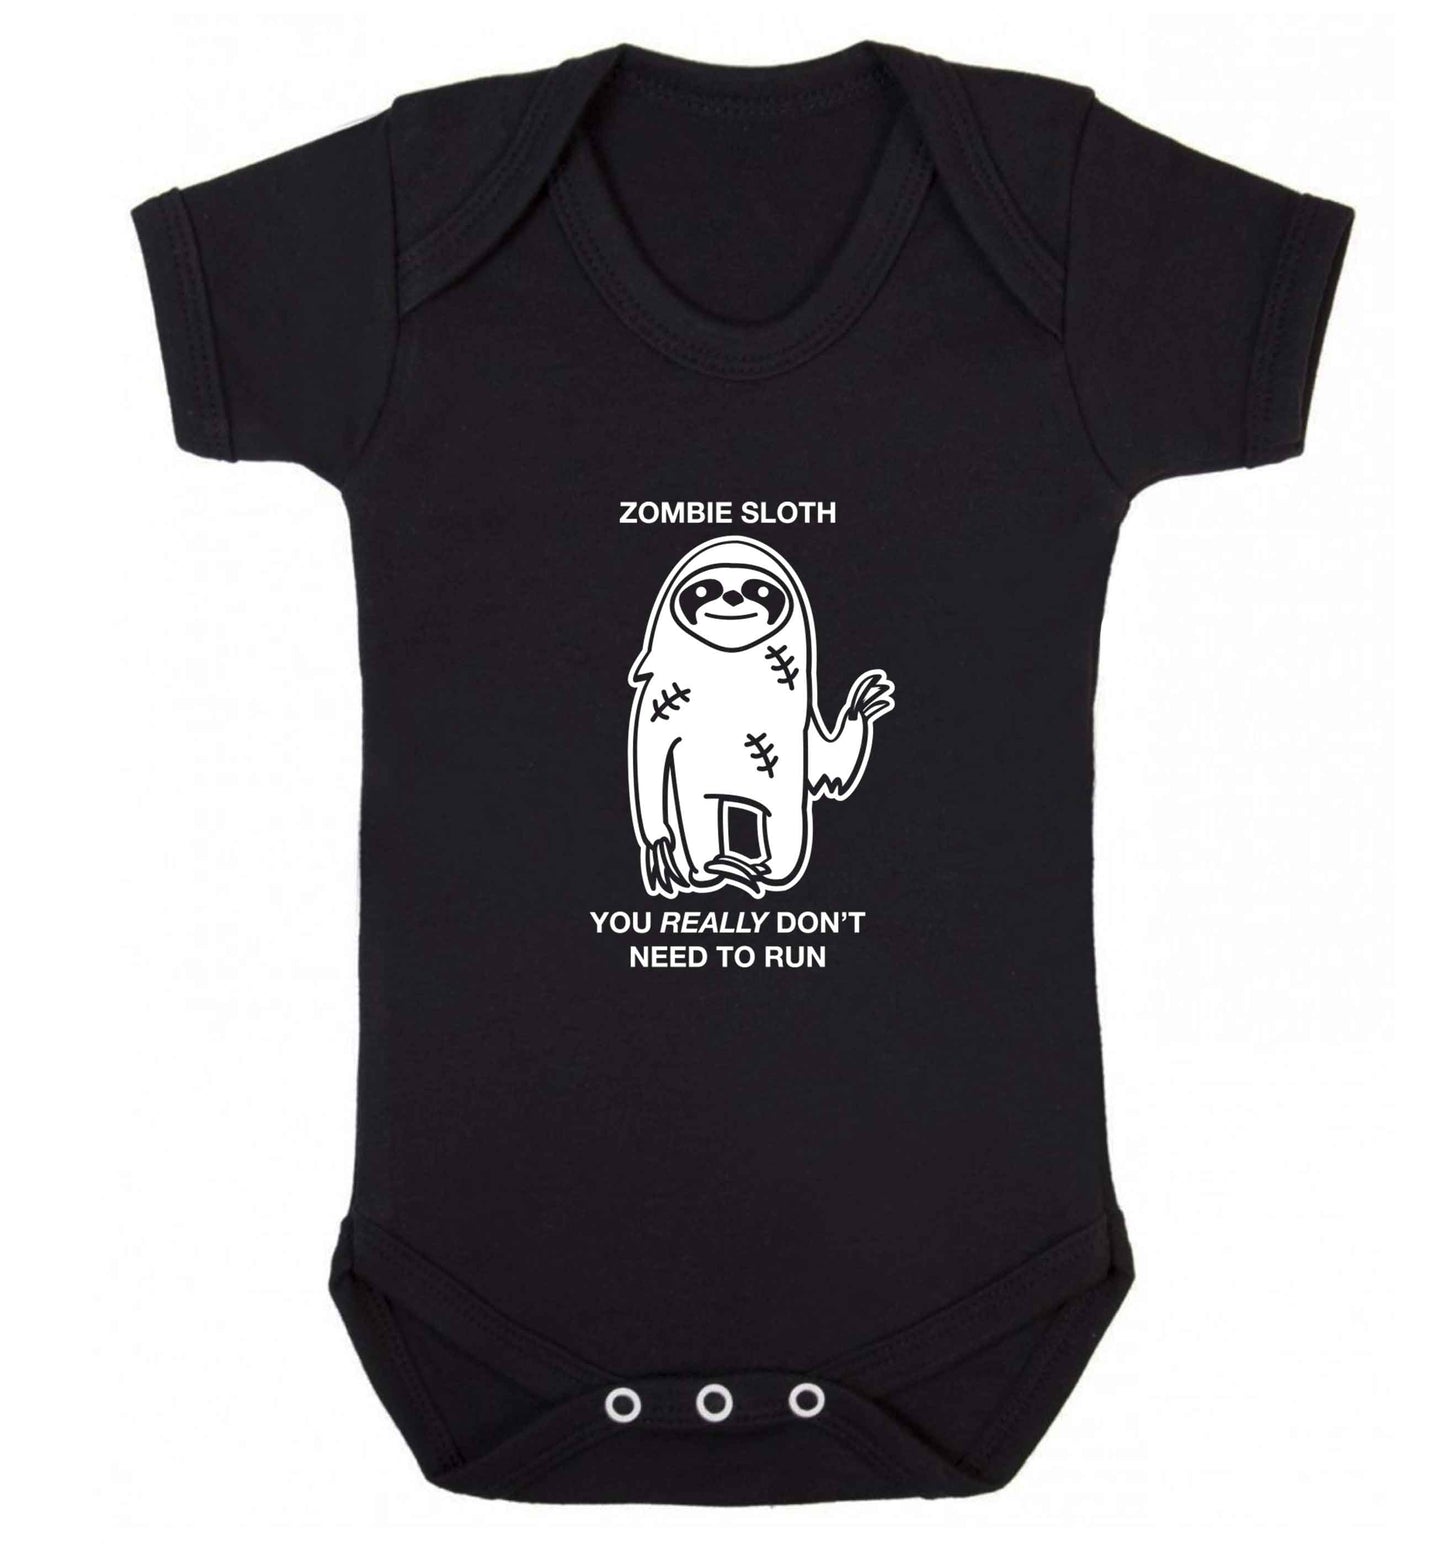 Zombie sloth you really don't need to run baby vest black 18-24 months